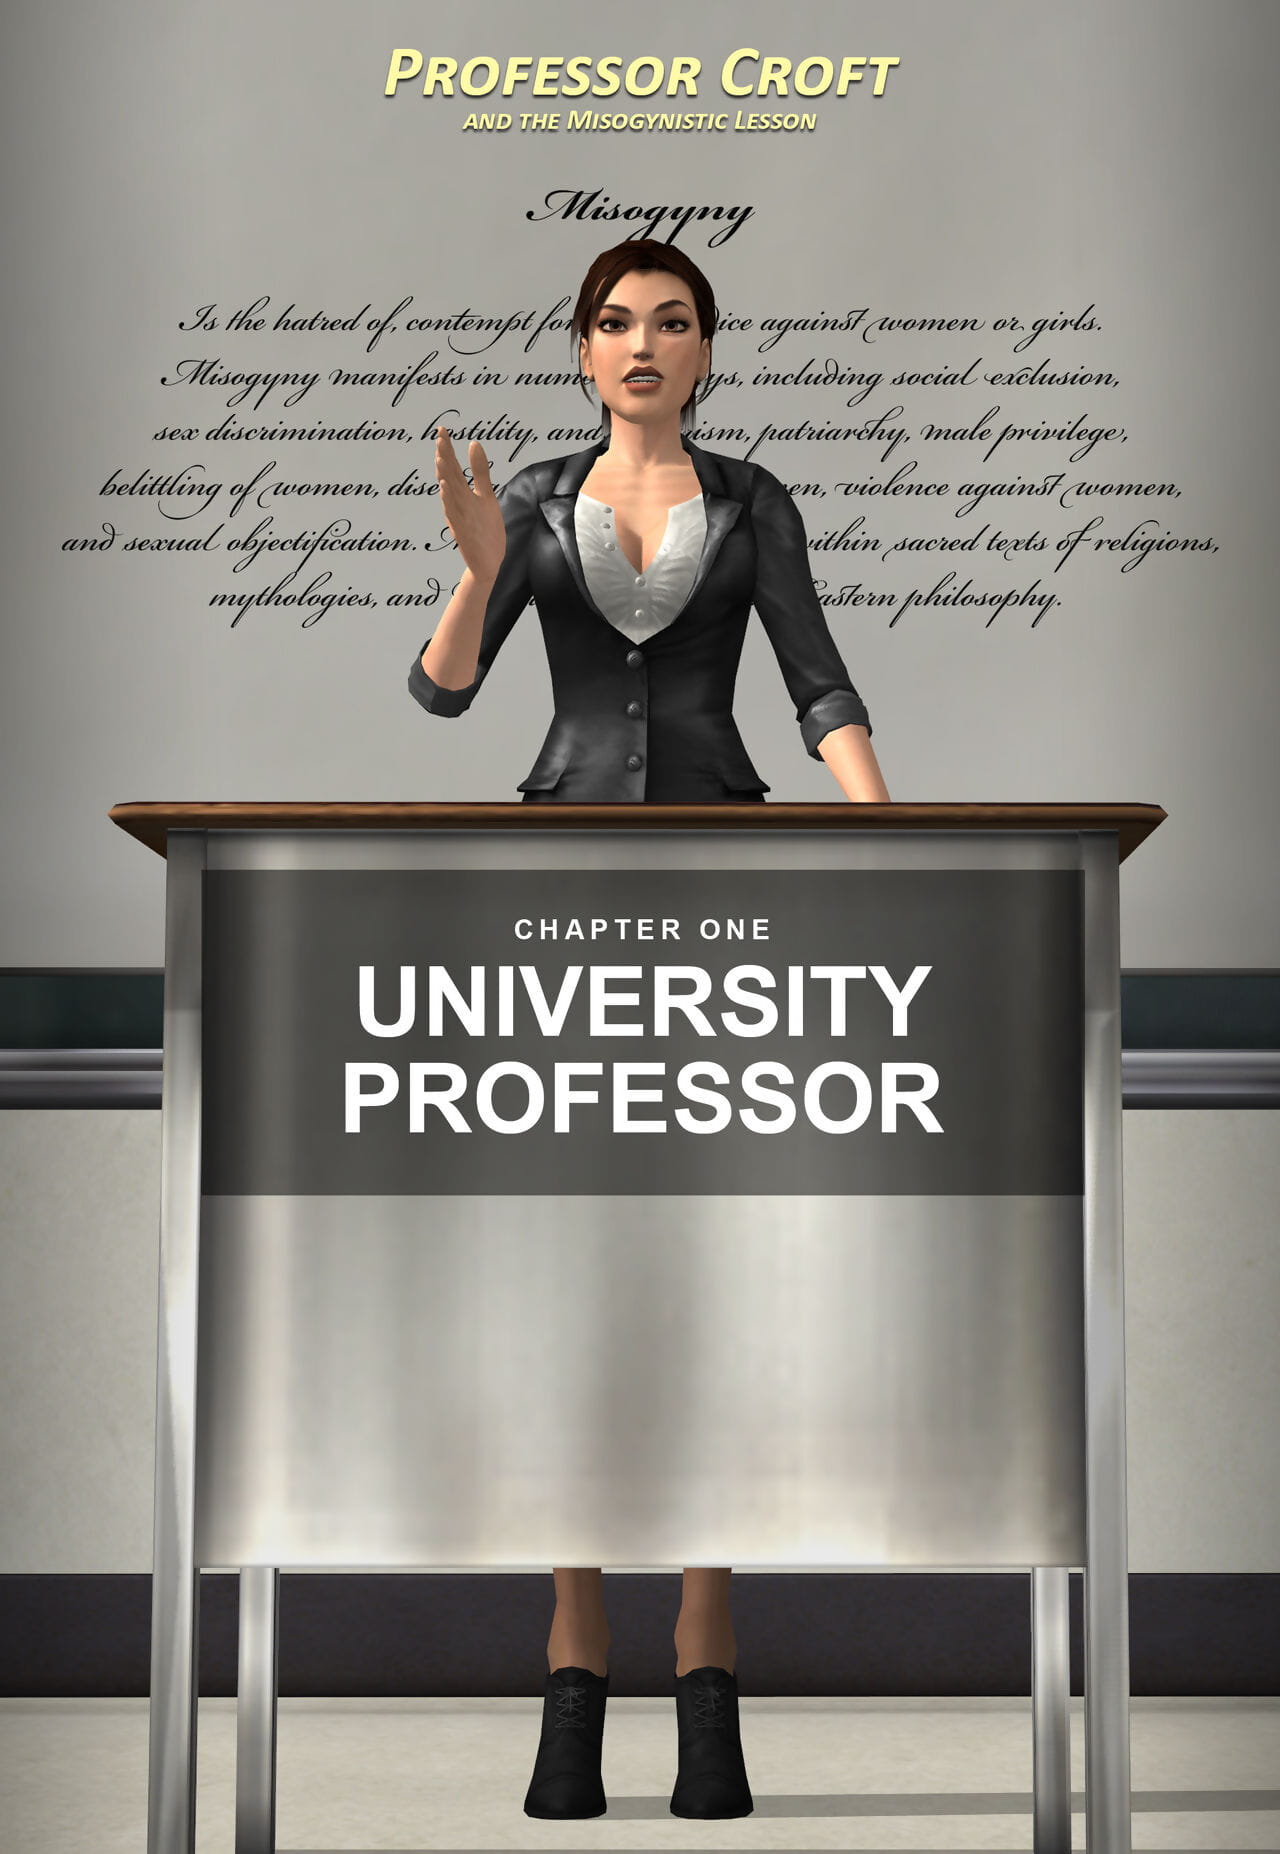 lctr- Professor Croft and The Misogynistic Lesson page 1